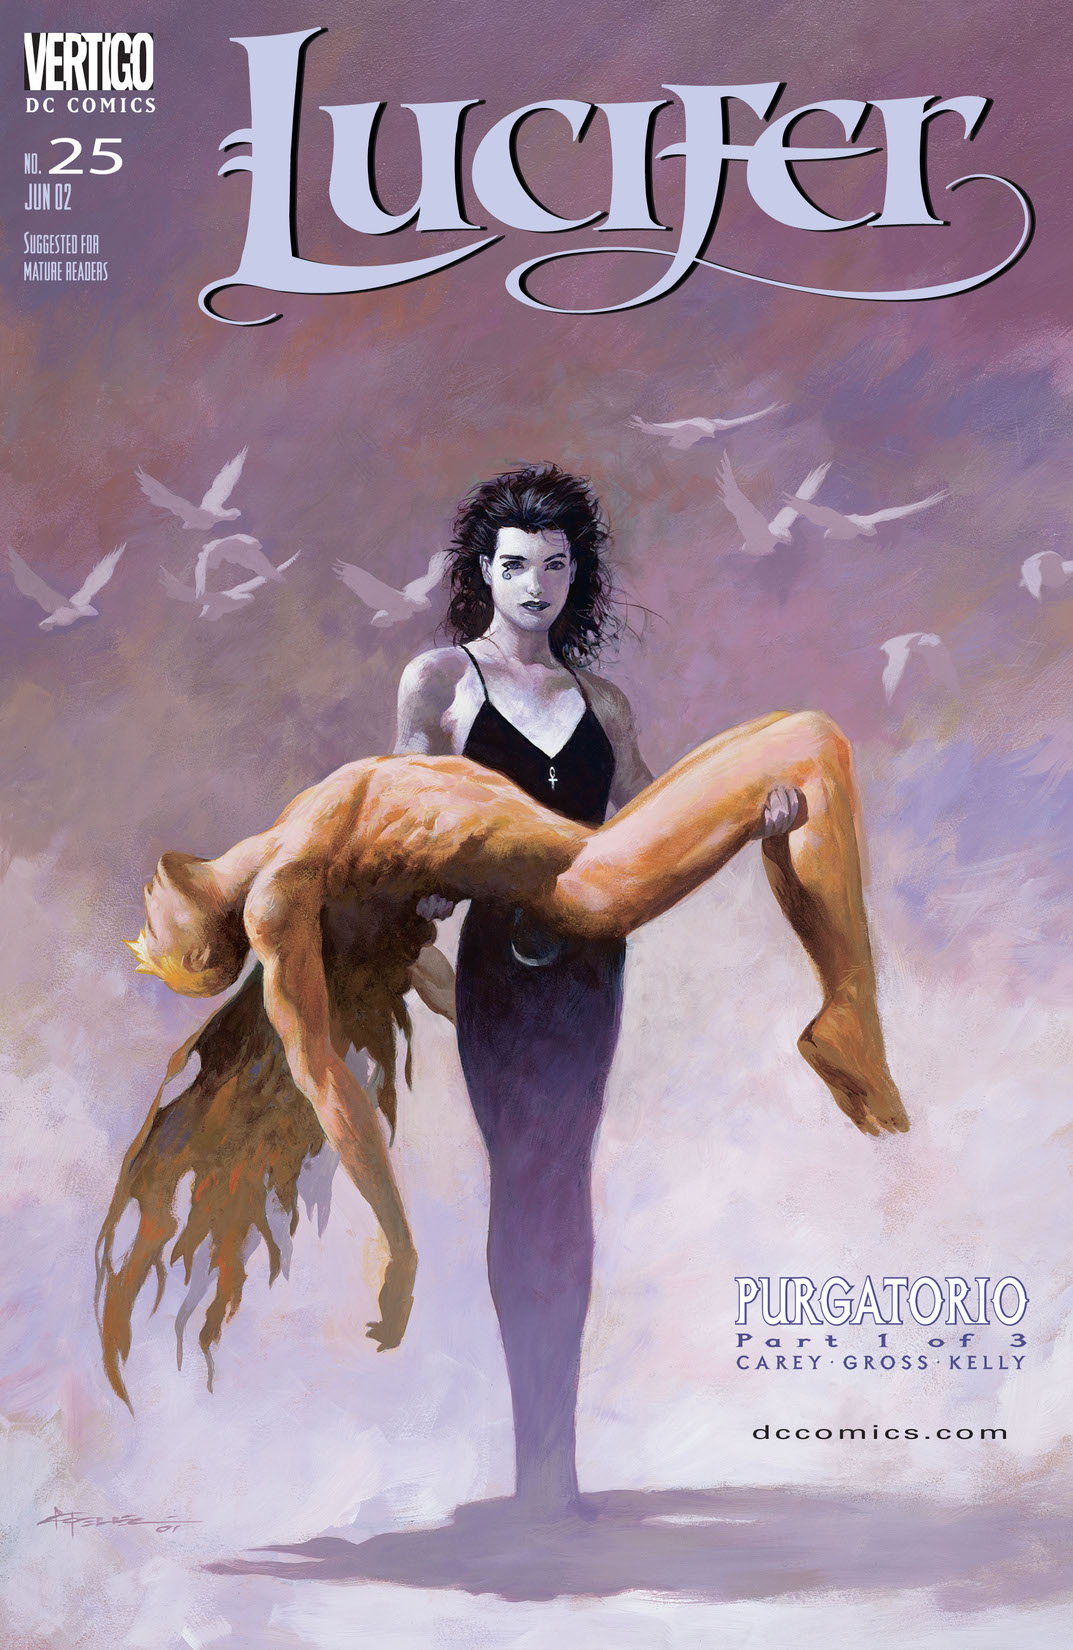 Lucifer #25 preview images